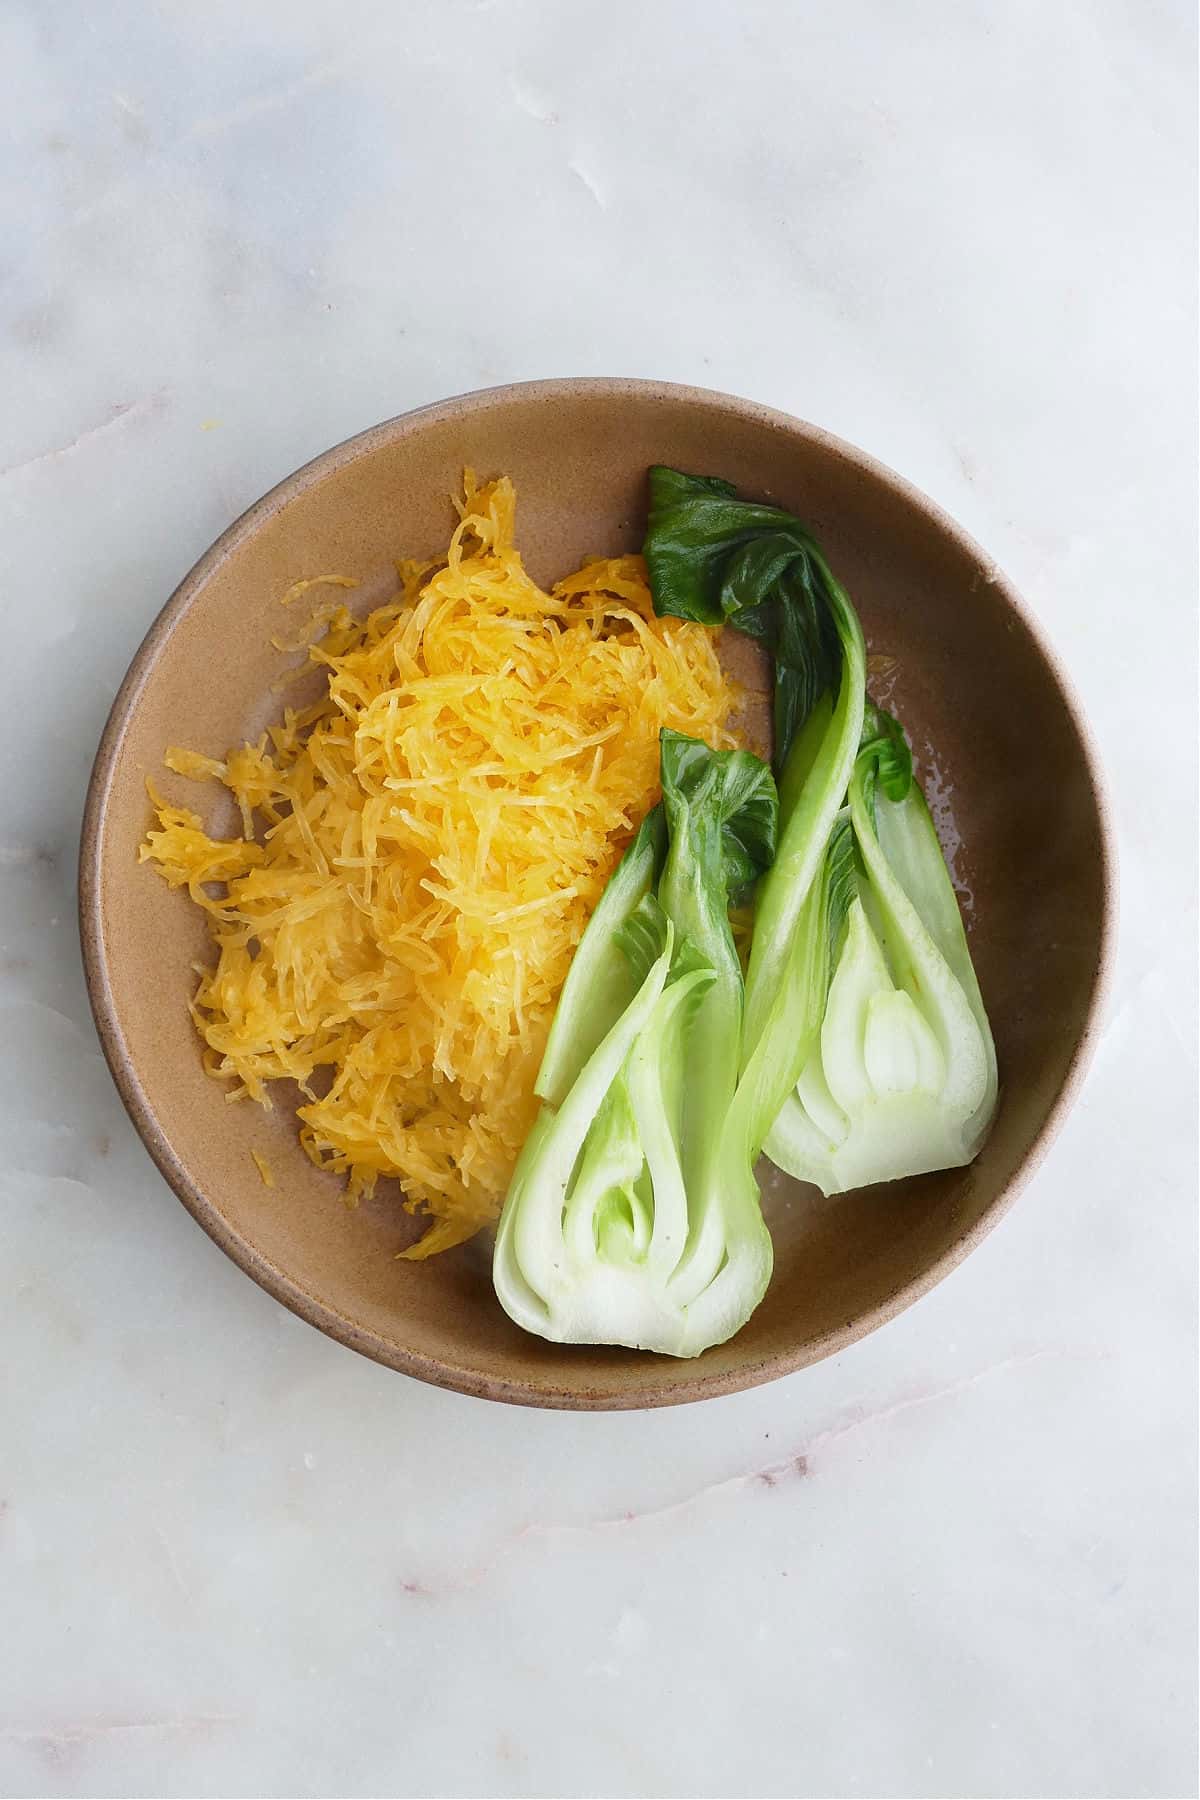 spaghetti squash noodles and bok choy in a brown serving bowl on a counter